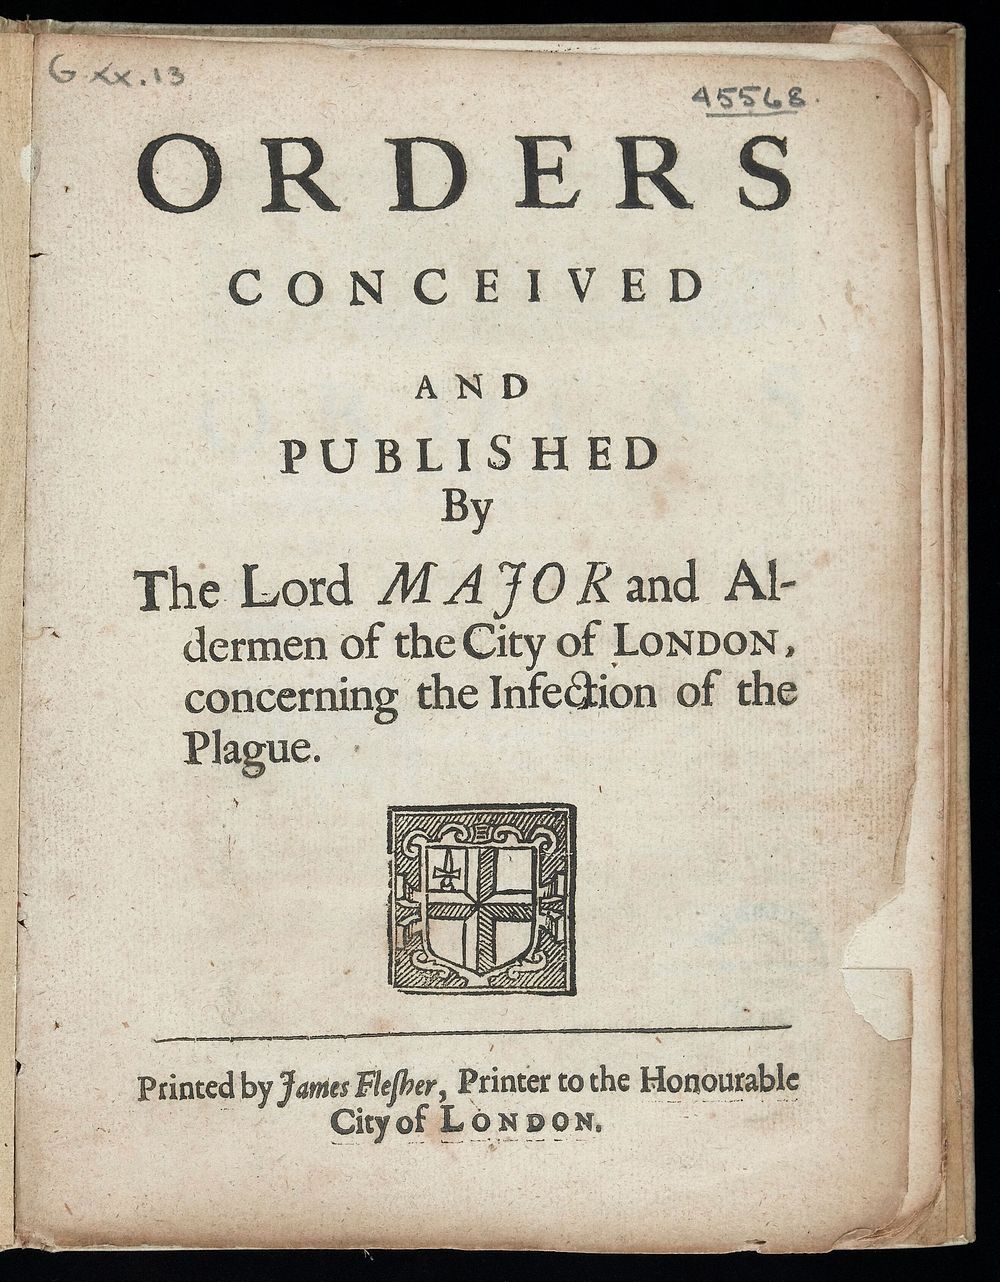 Orders conceived and published by the Lord Maior and Aldermen of the City of London, concerning the infection of the plague.